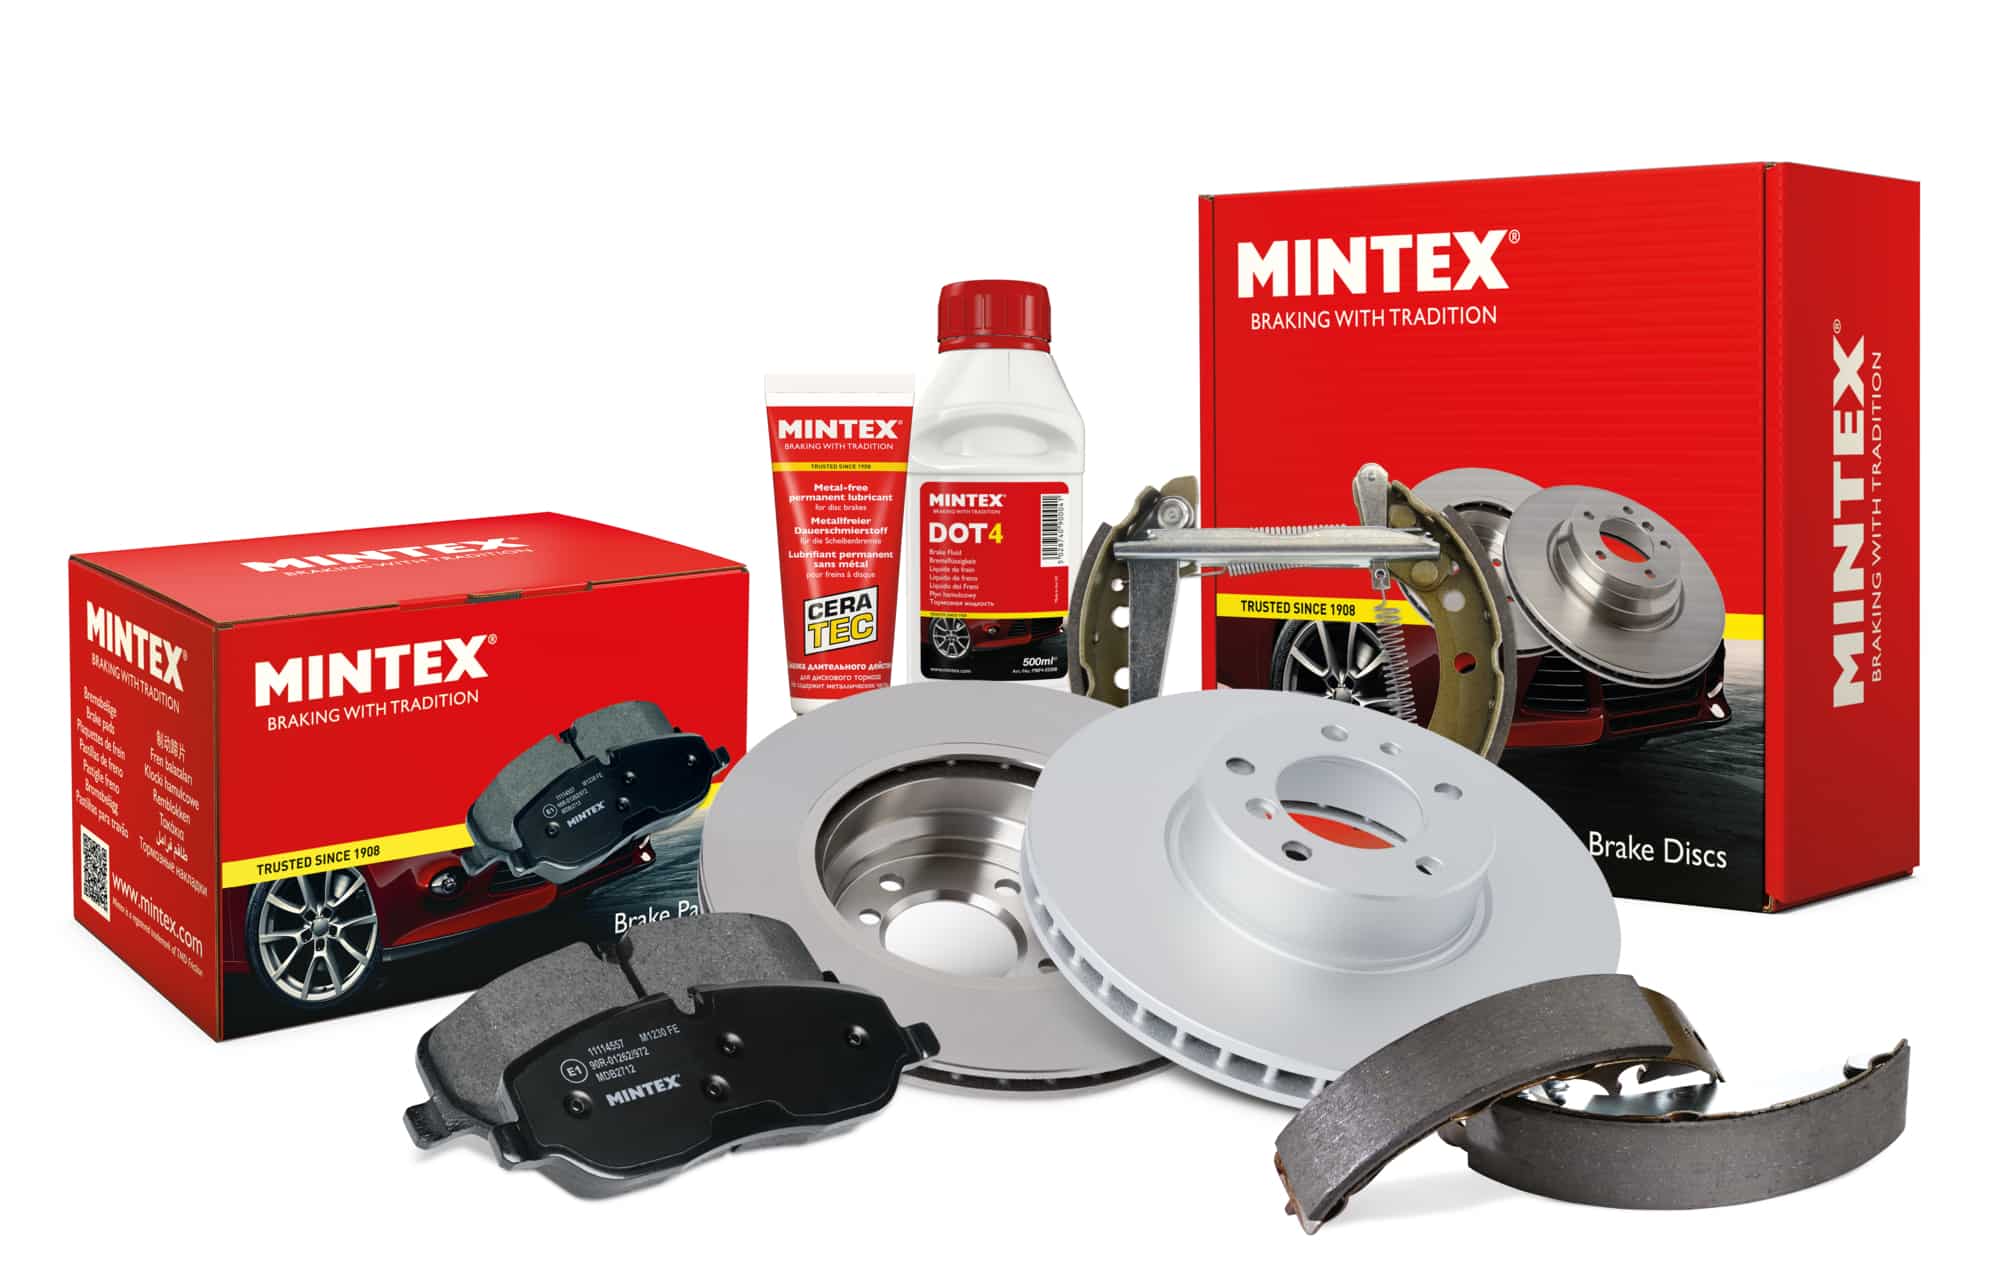 Mintex has launched new discs and drums